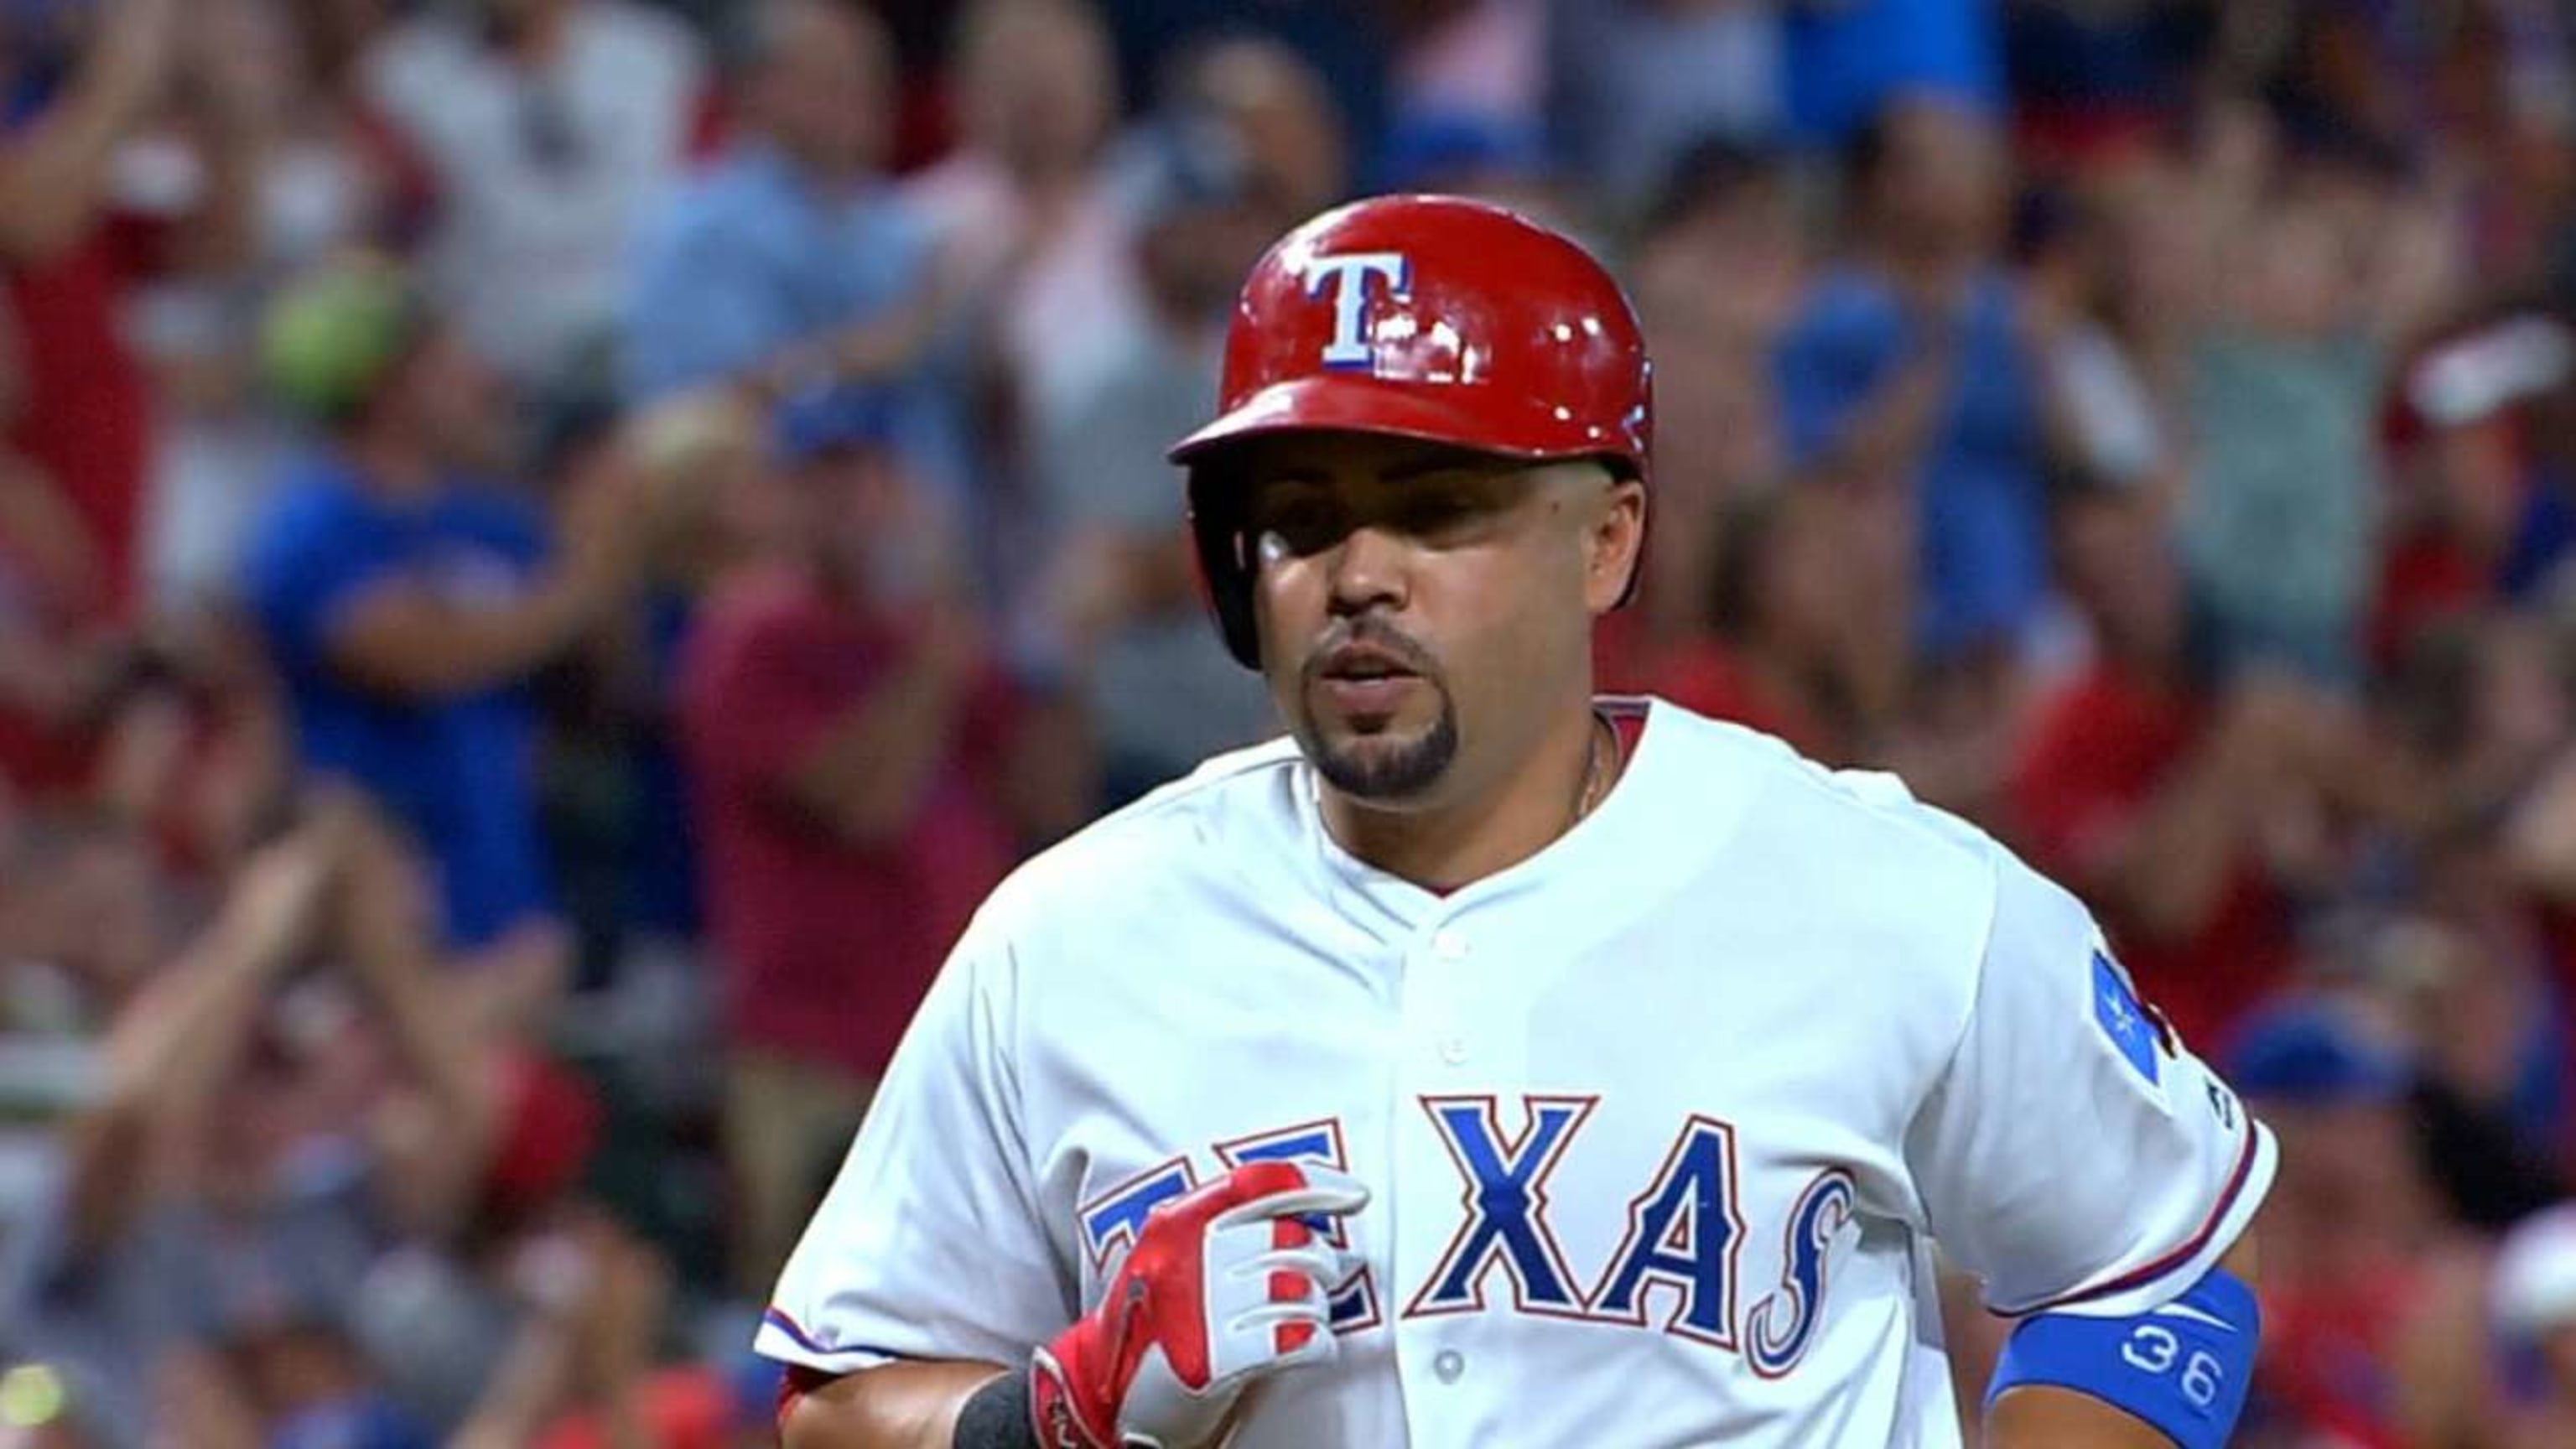 Astros officially announce deal with Carlos Beltran - The Crawfish